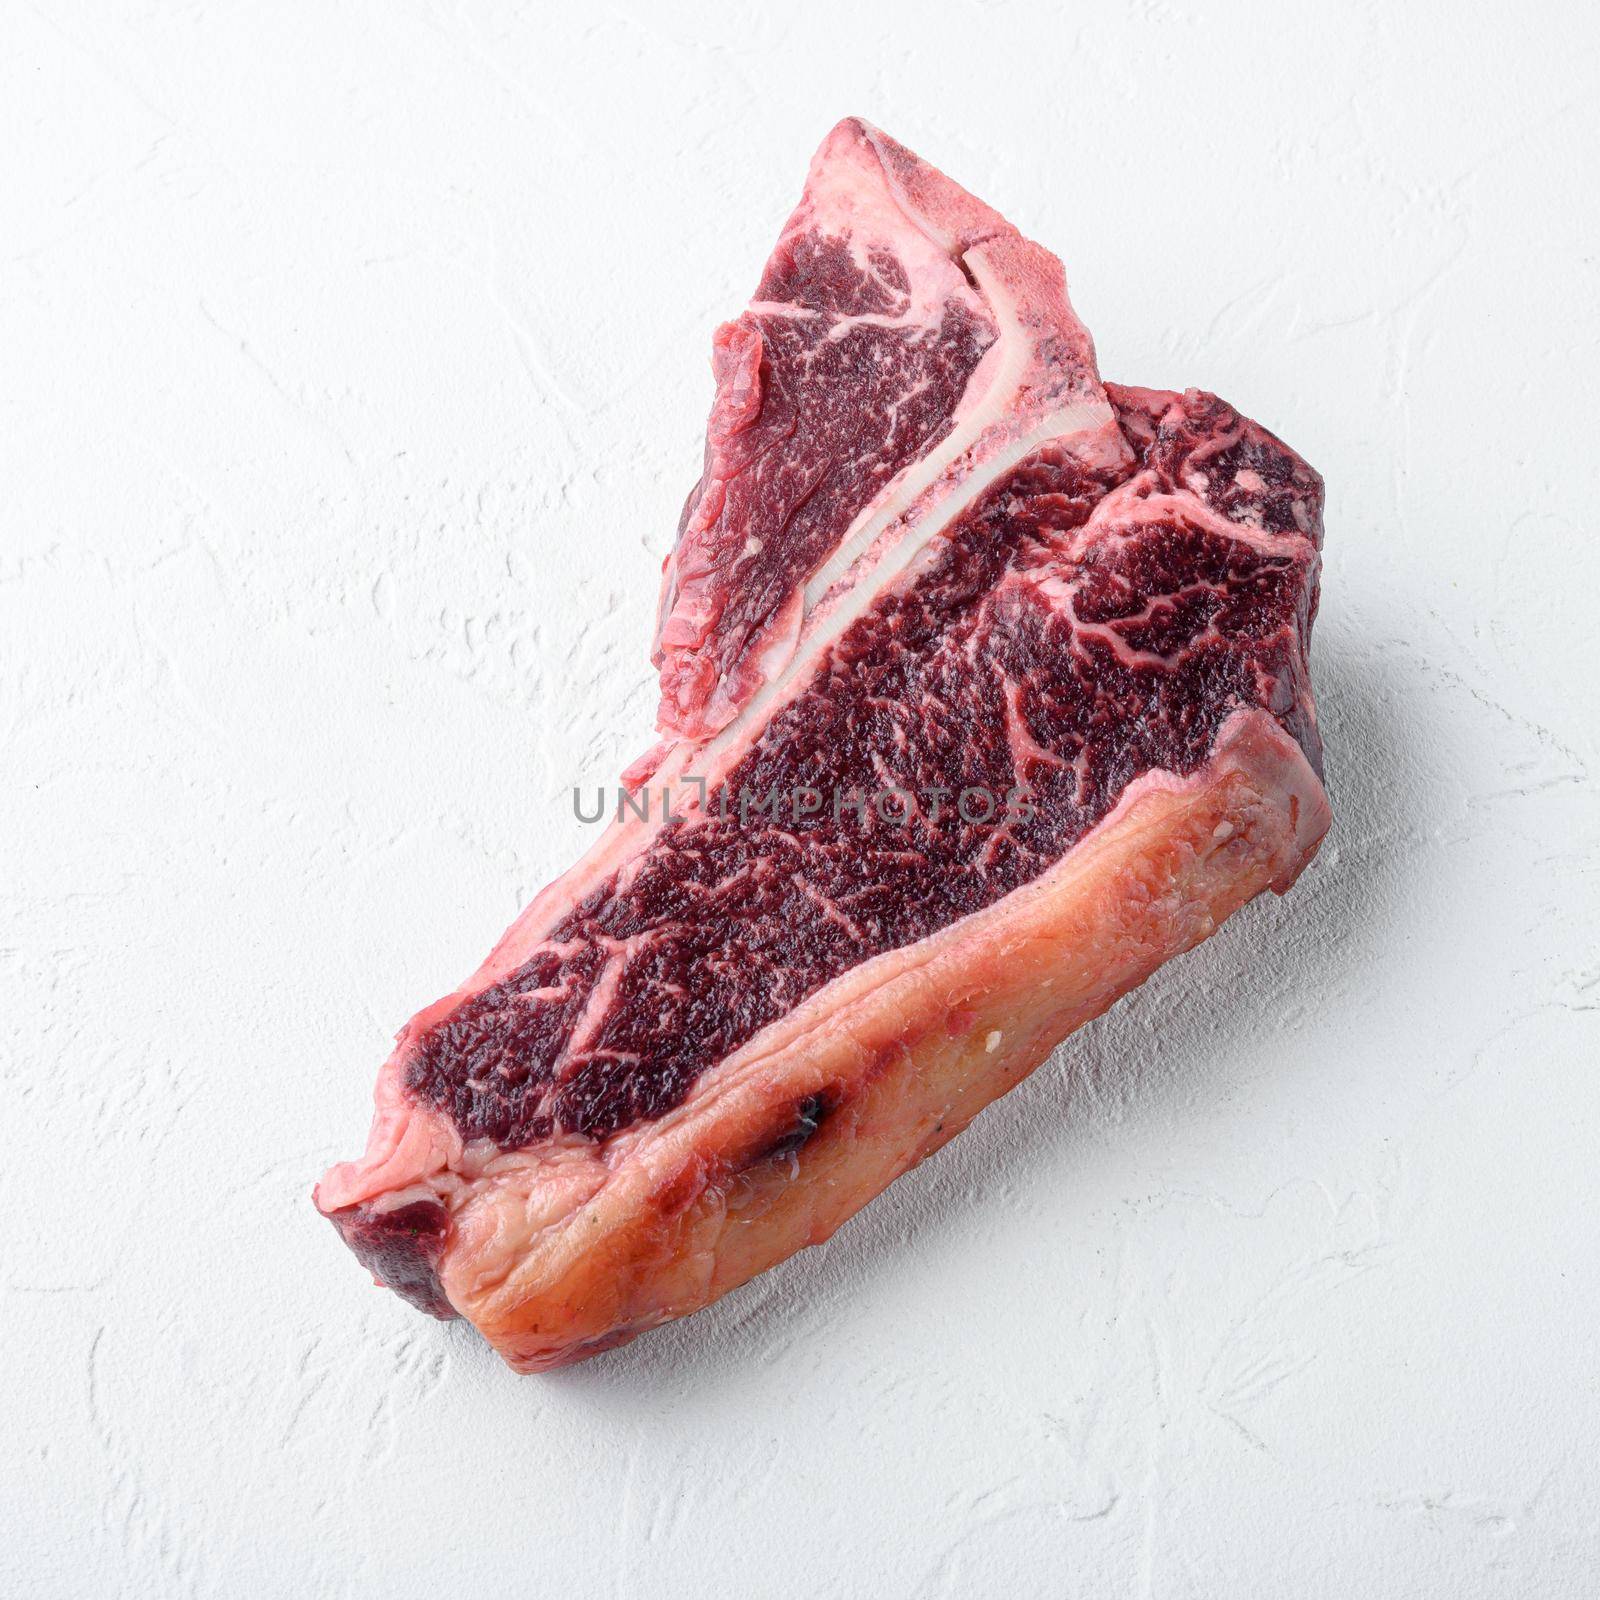 Dry-aged Raw T-bone or porterhouse beef marbled meat prime steak, on white stone background, square format by Ilianesolenyi